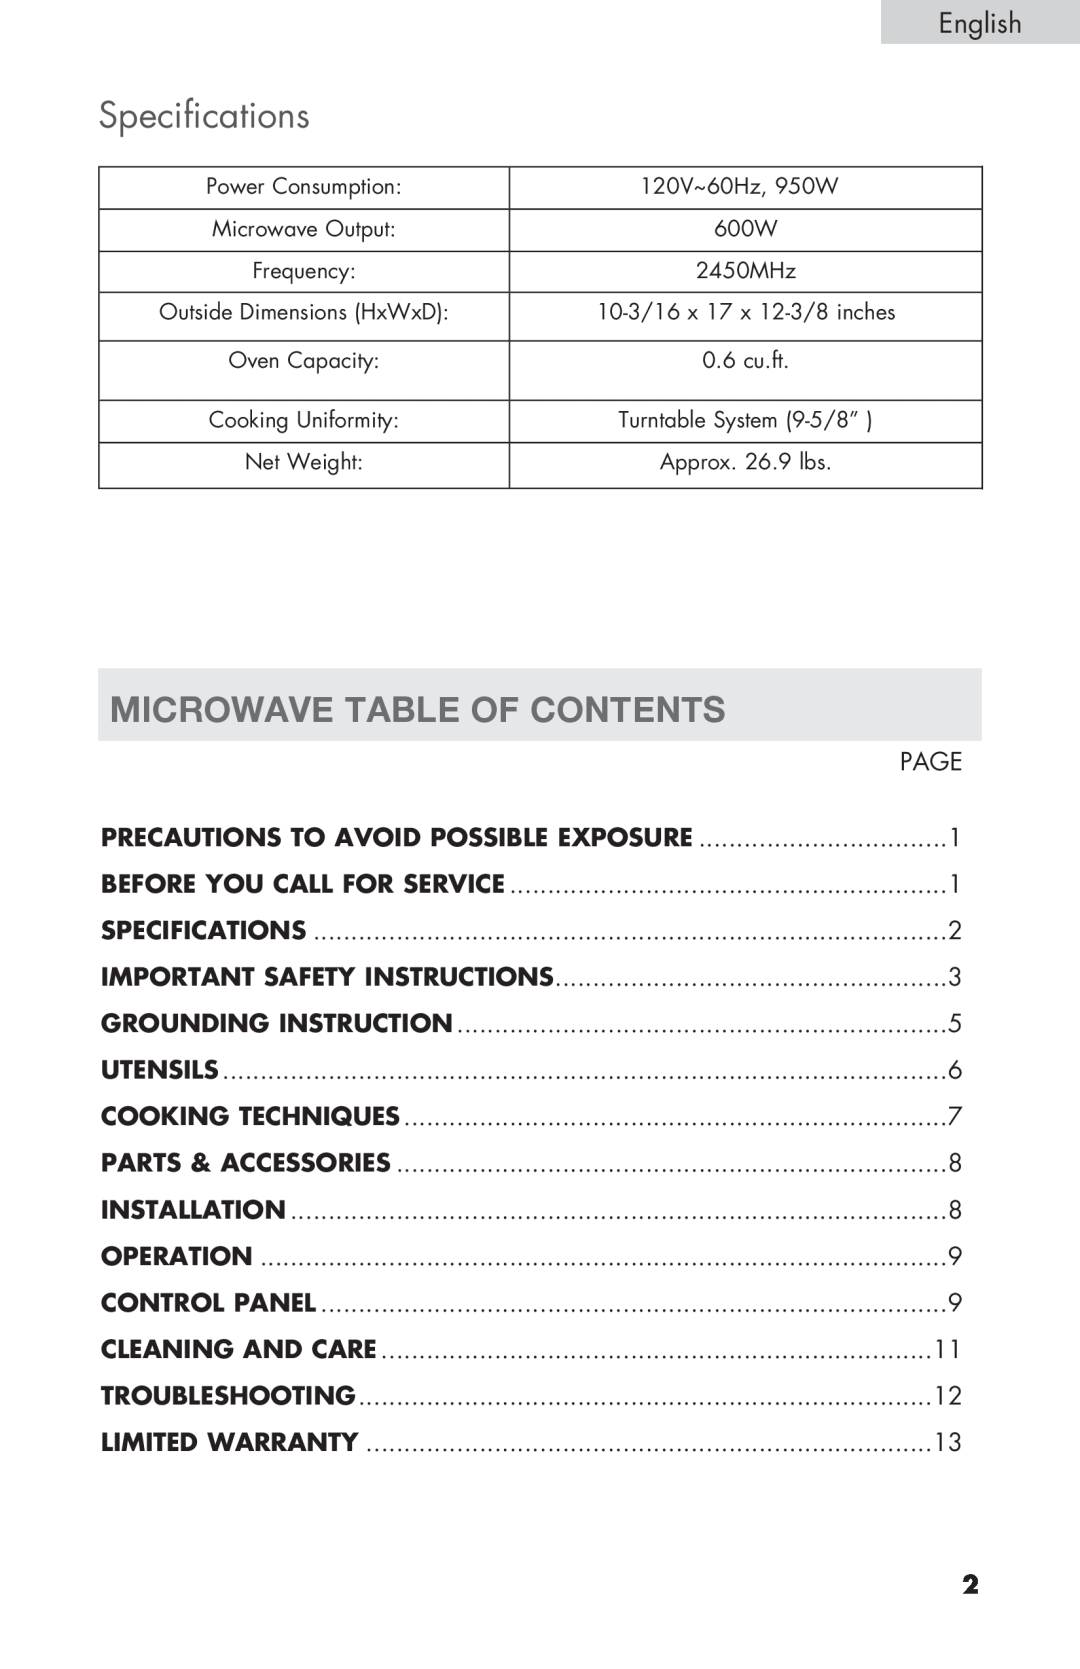 Haier MWM6600RW user manual Specifications, Microwave Table Of Contents 